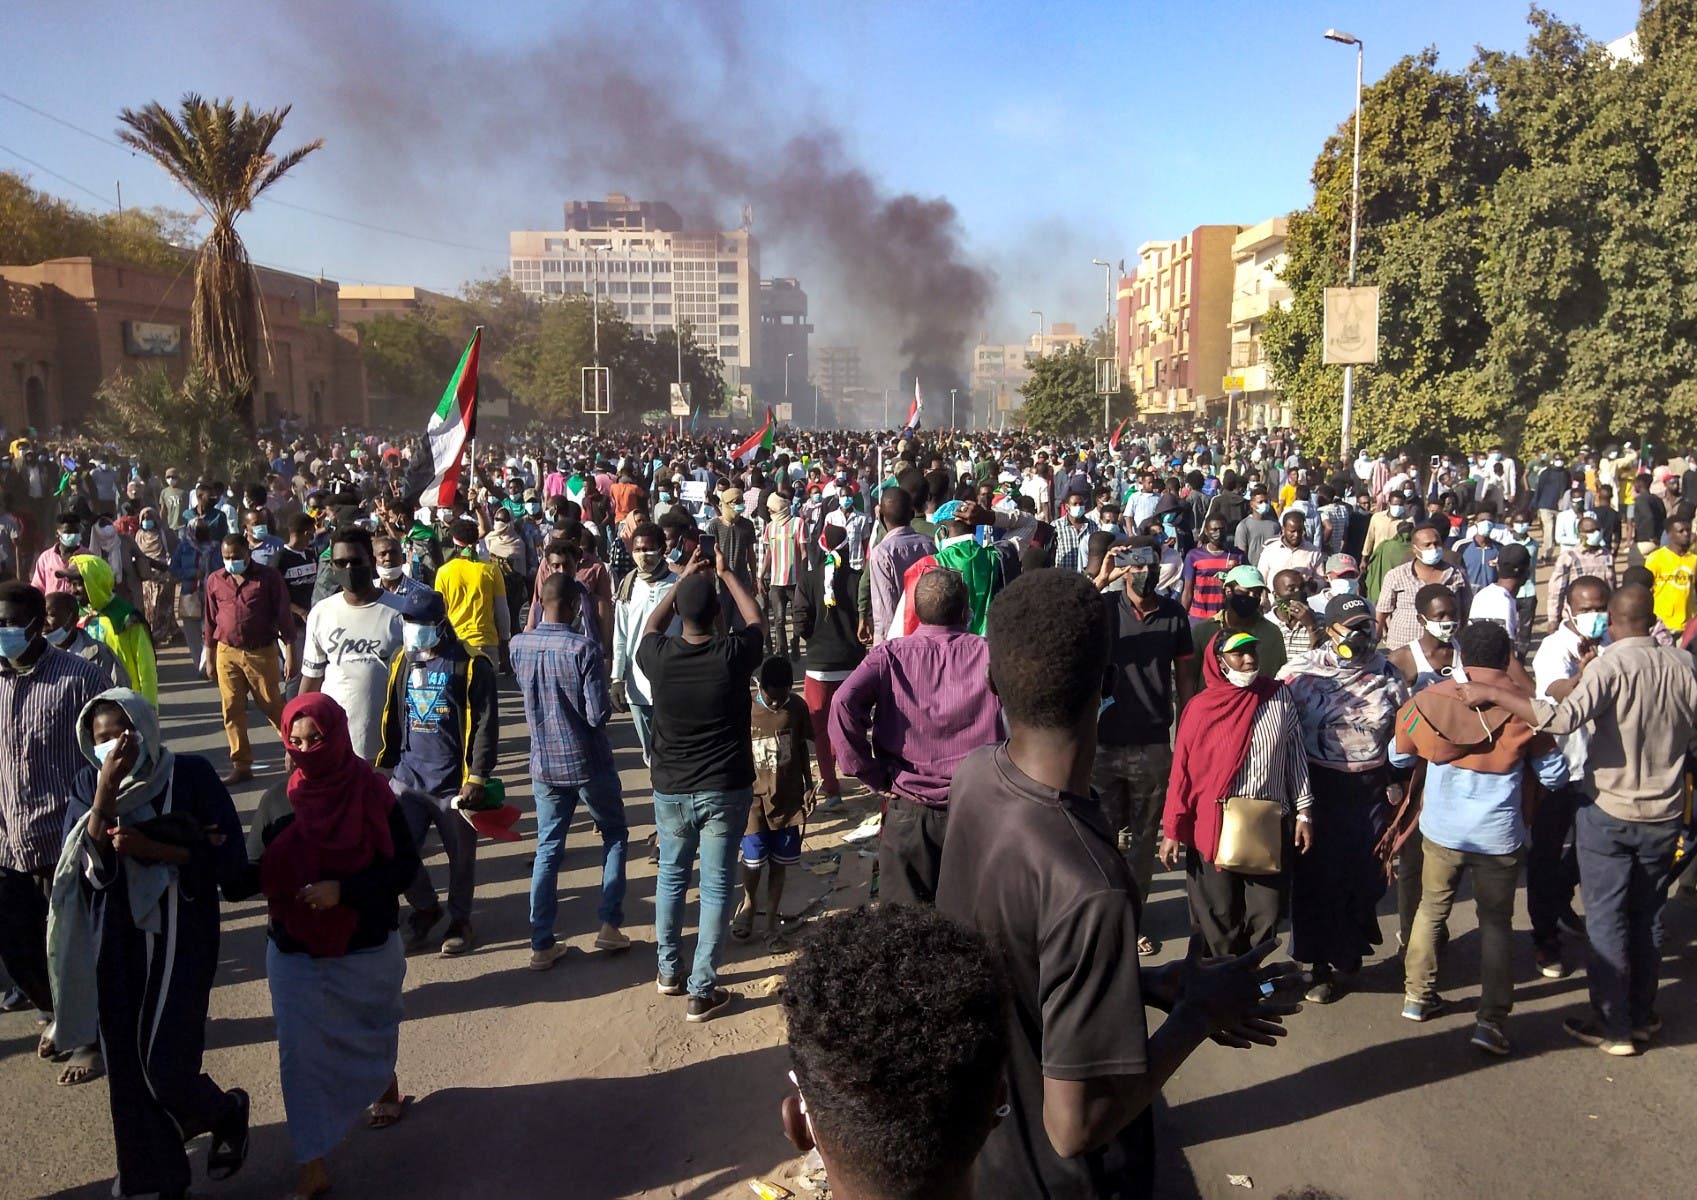 Khartoum is preparing for new demonstrations … and shuts down the internet